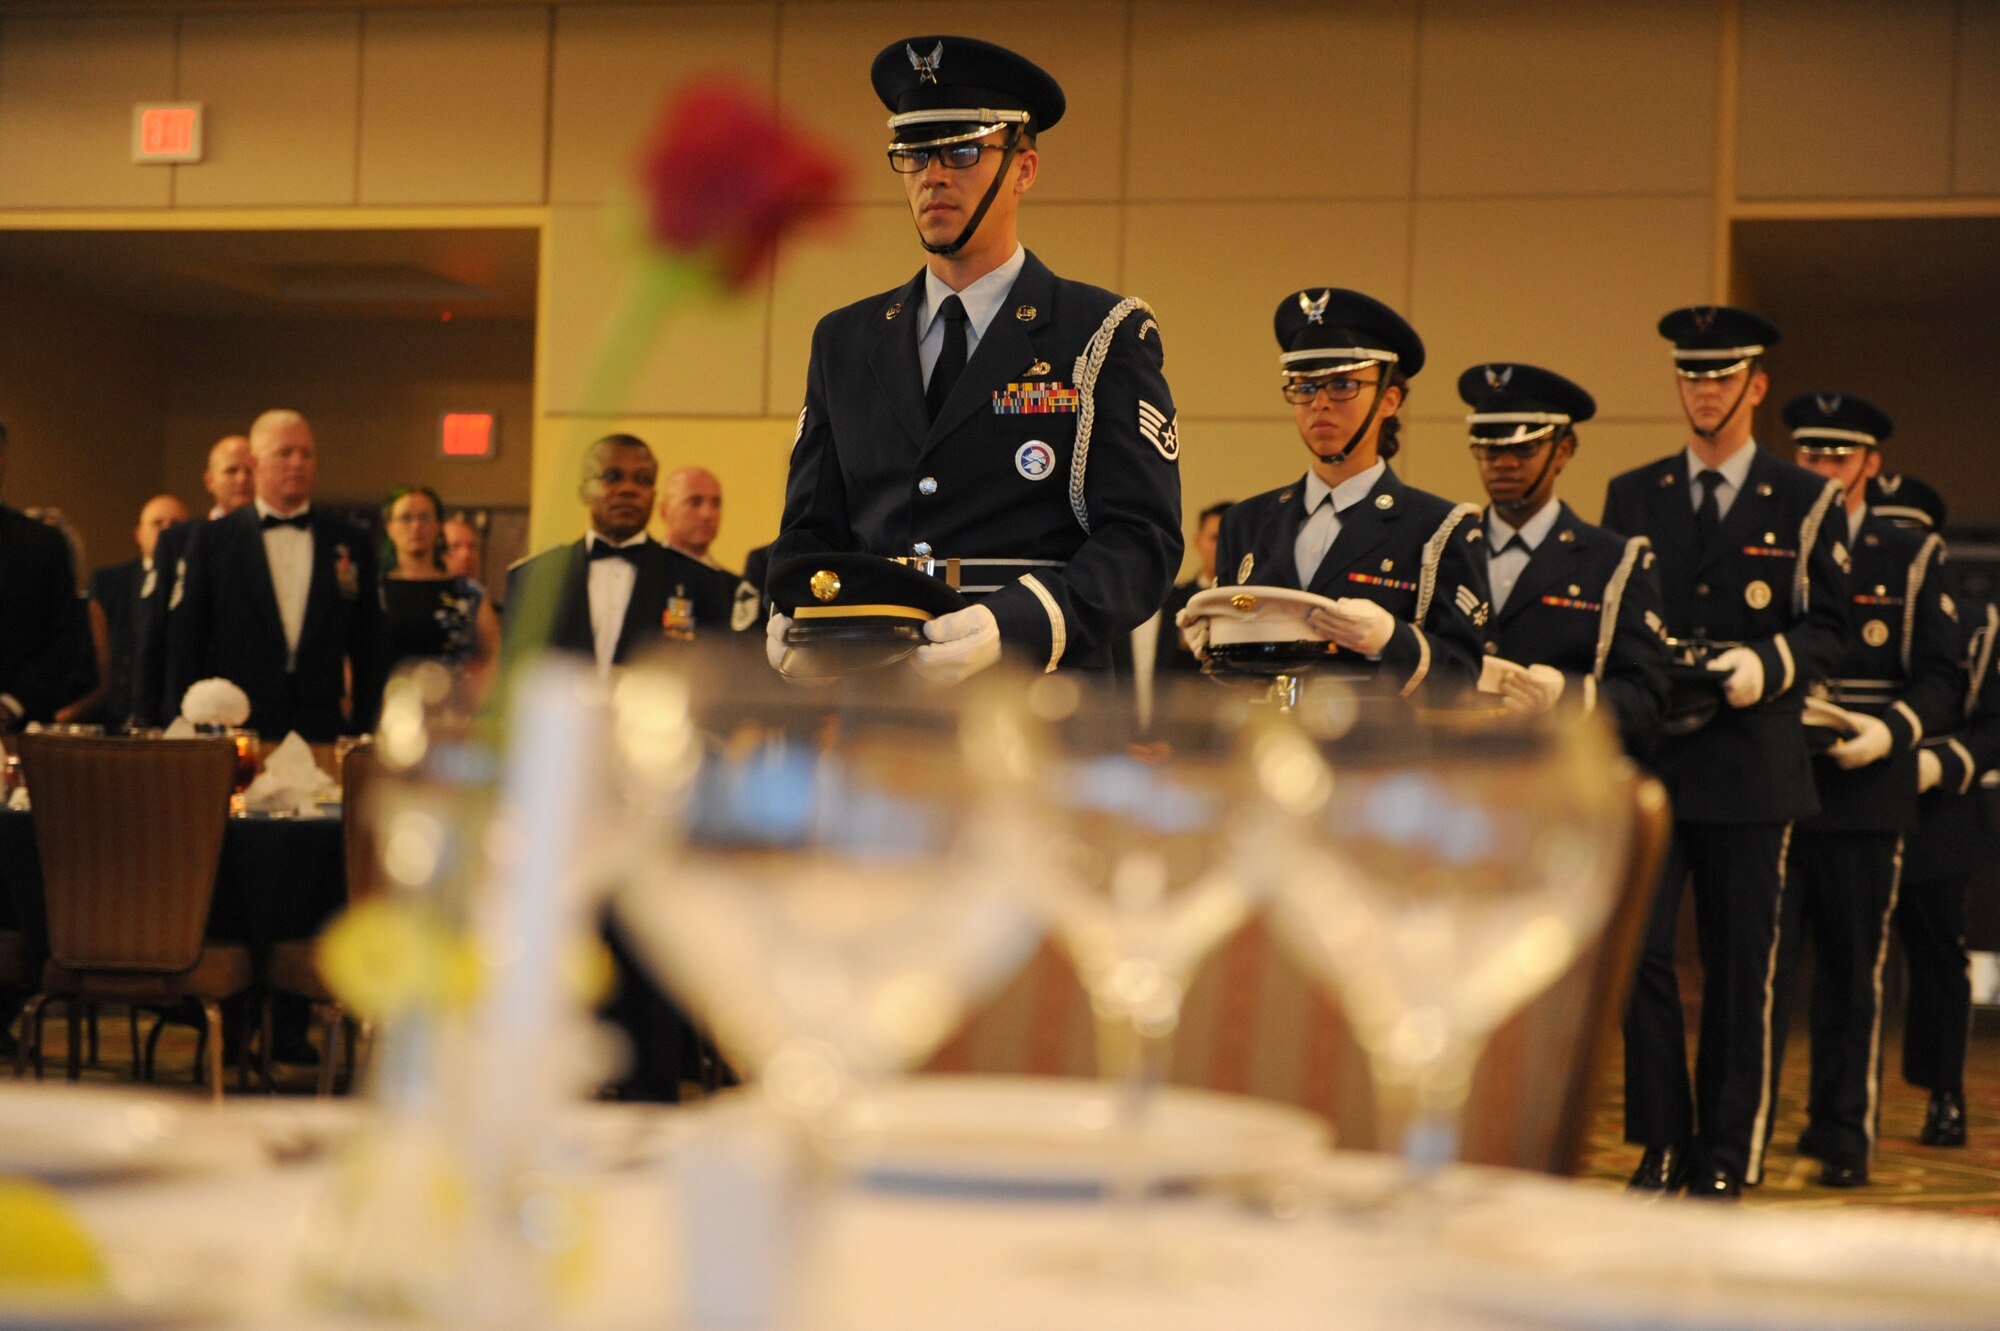 Members of the Keesler Air Force Base Honor Guard perform a POW/MIA table ceremony during the Senior Noncommissioned Officer Induction Ceremony at the Bay Breeze Event Center Aug. 18, 2016, on Keesler Air Force Base, Miss. Thirty-seven enlisted members were recognized and received a commemorative medallion at the event. (U.S. Air Force photo by Kemberly Groue/Released)